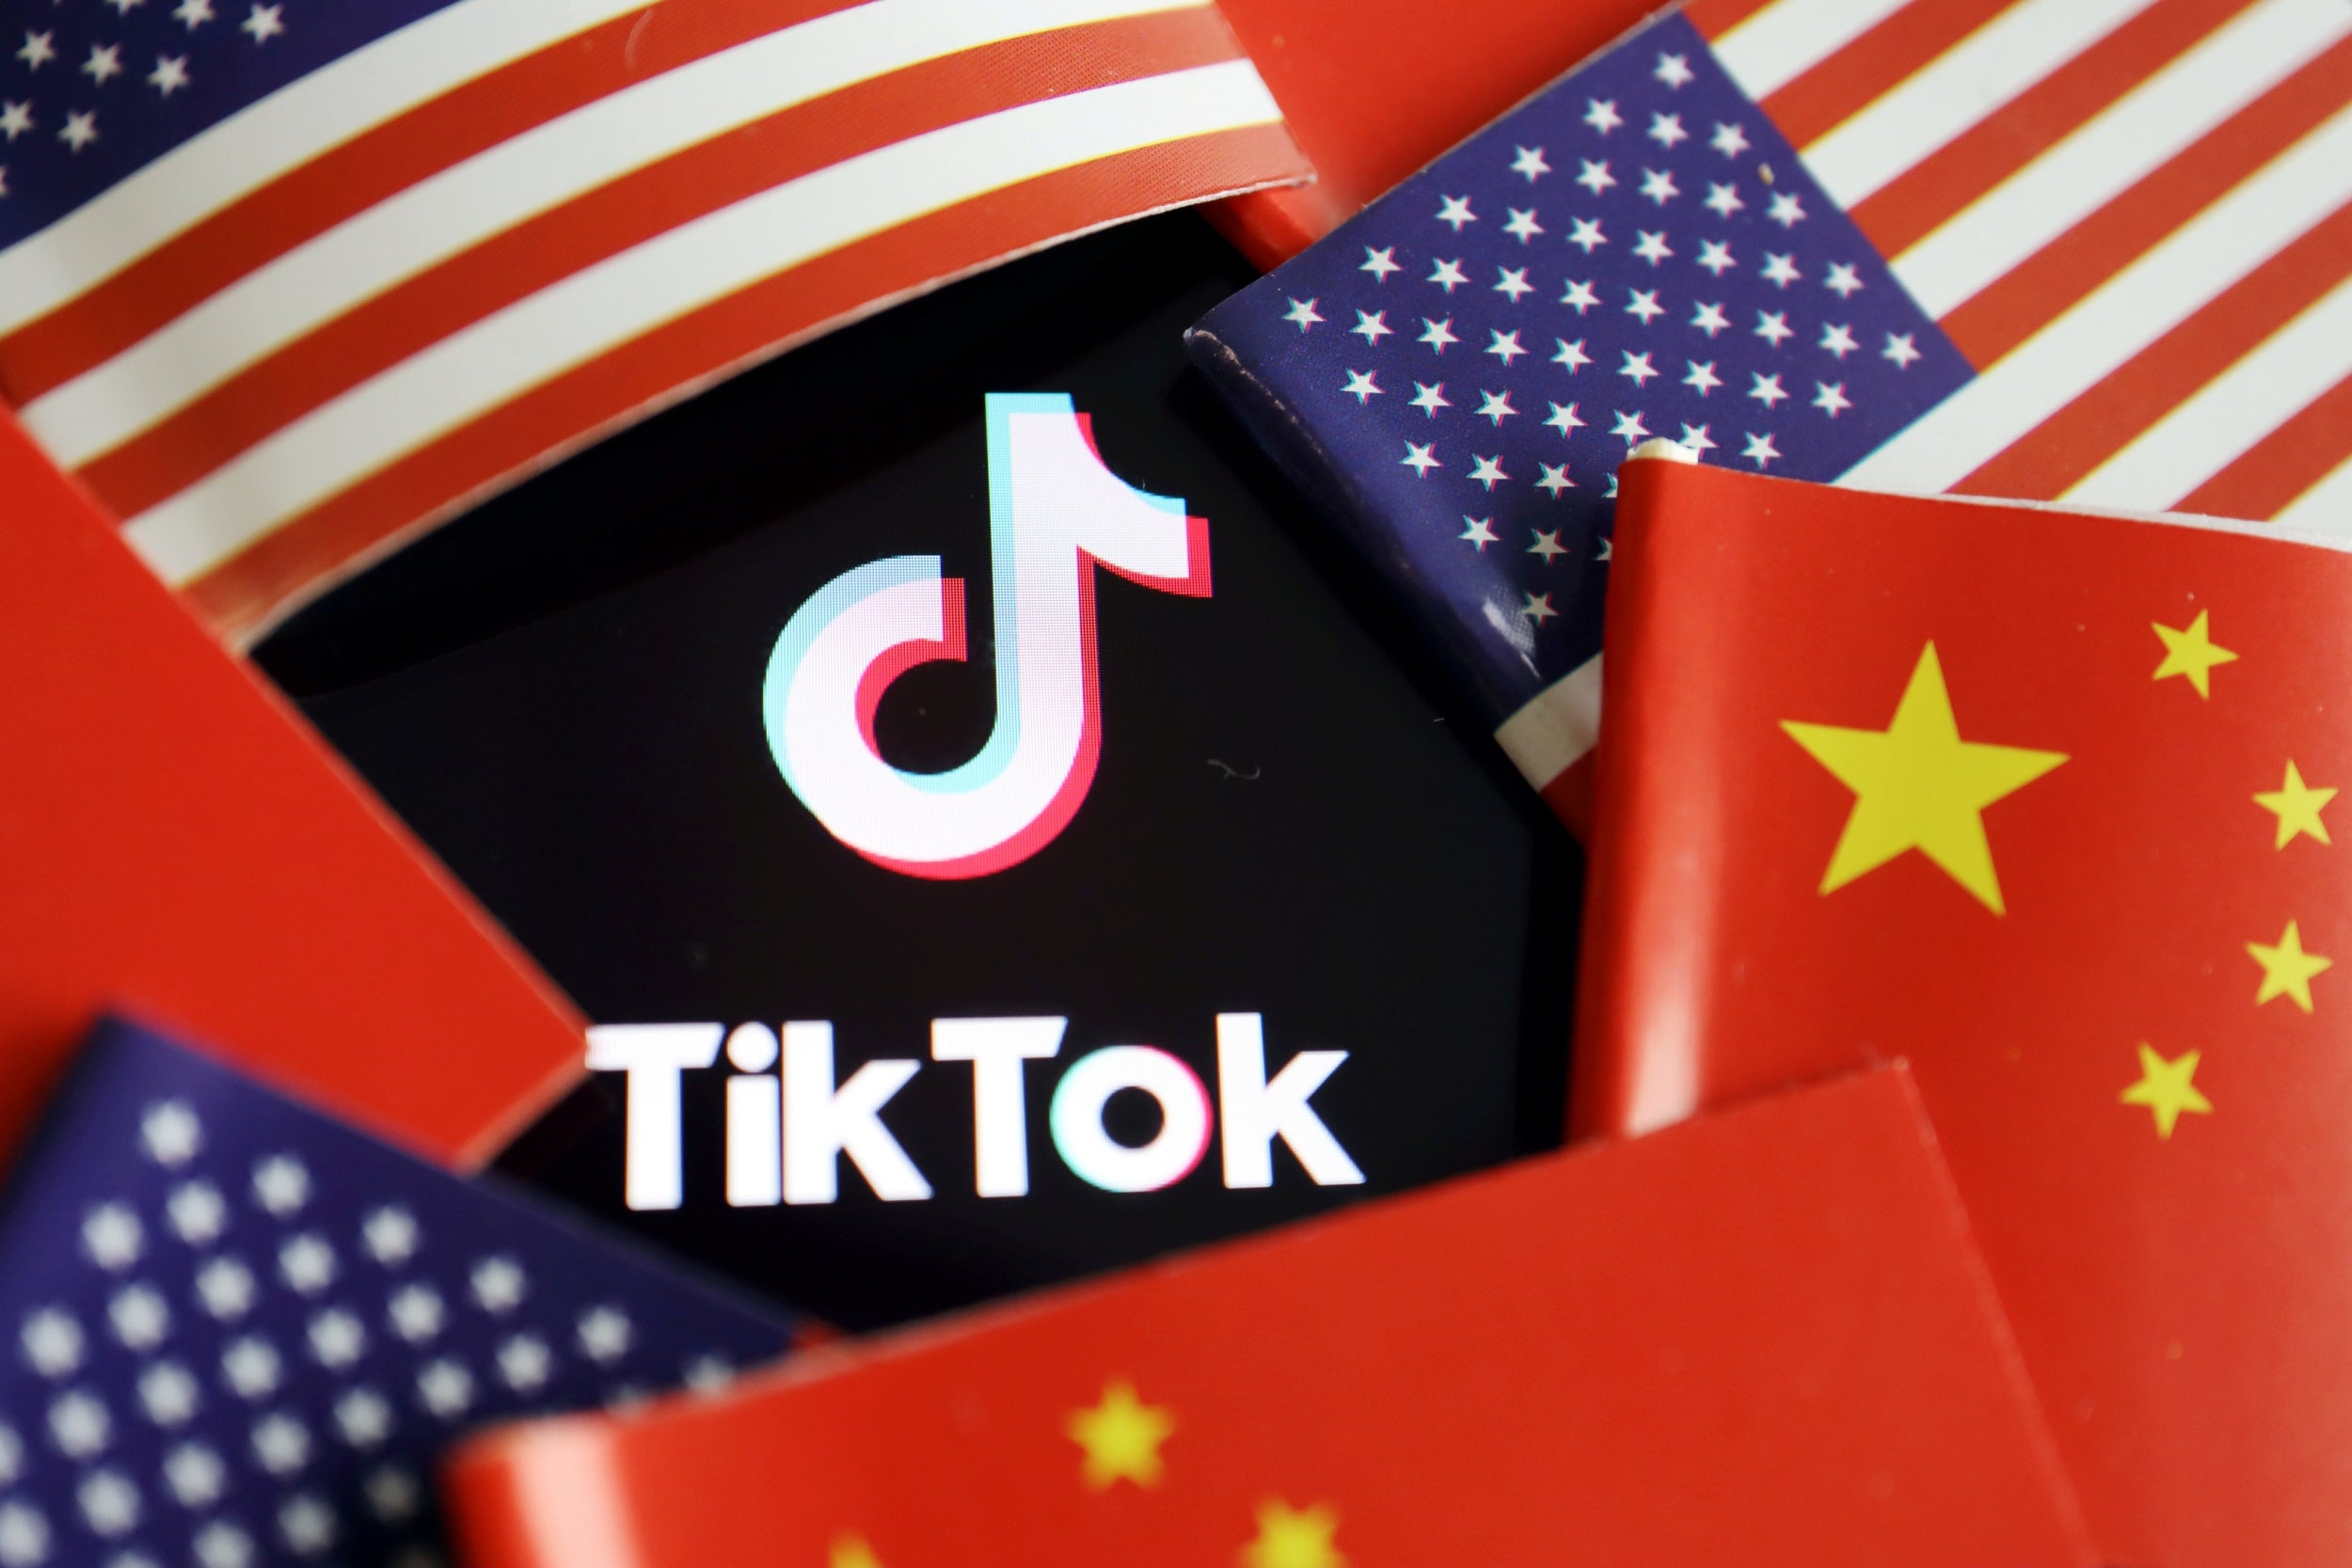 TikTok confirms it may move its HQ amid fight with Trump The